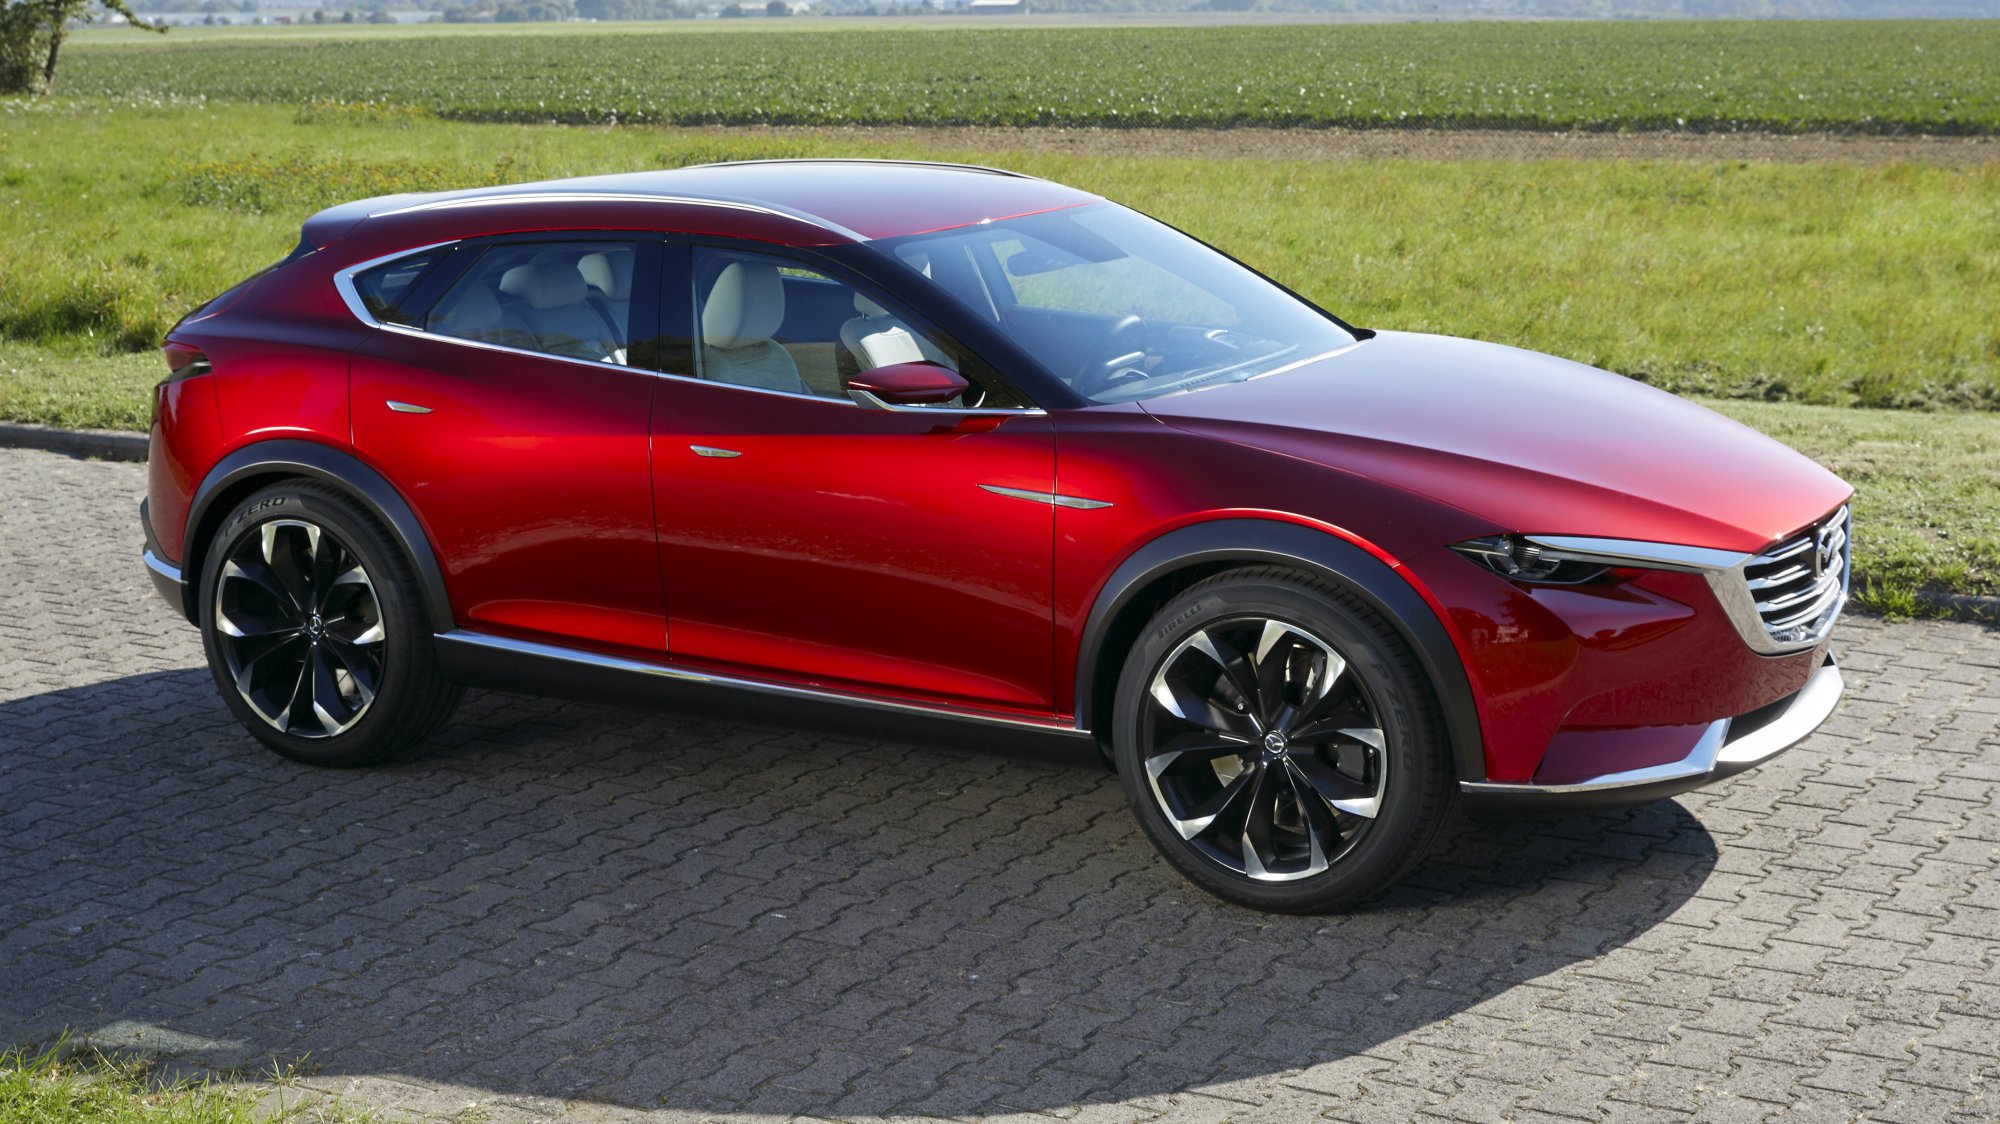 News - Mazda's Swoopy CX-8 Could Make It Here